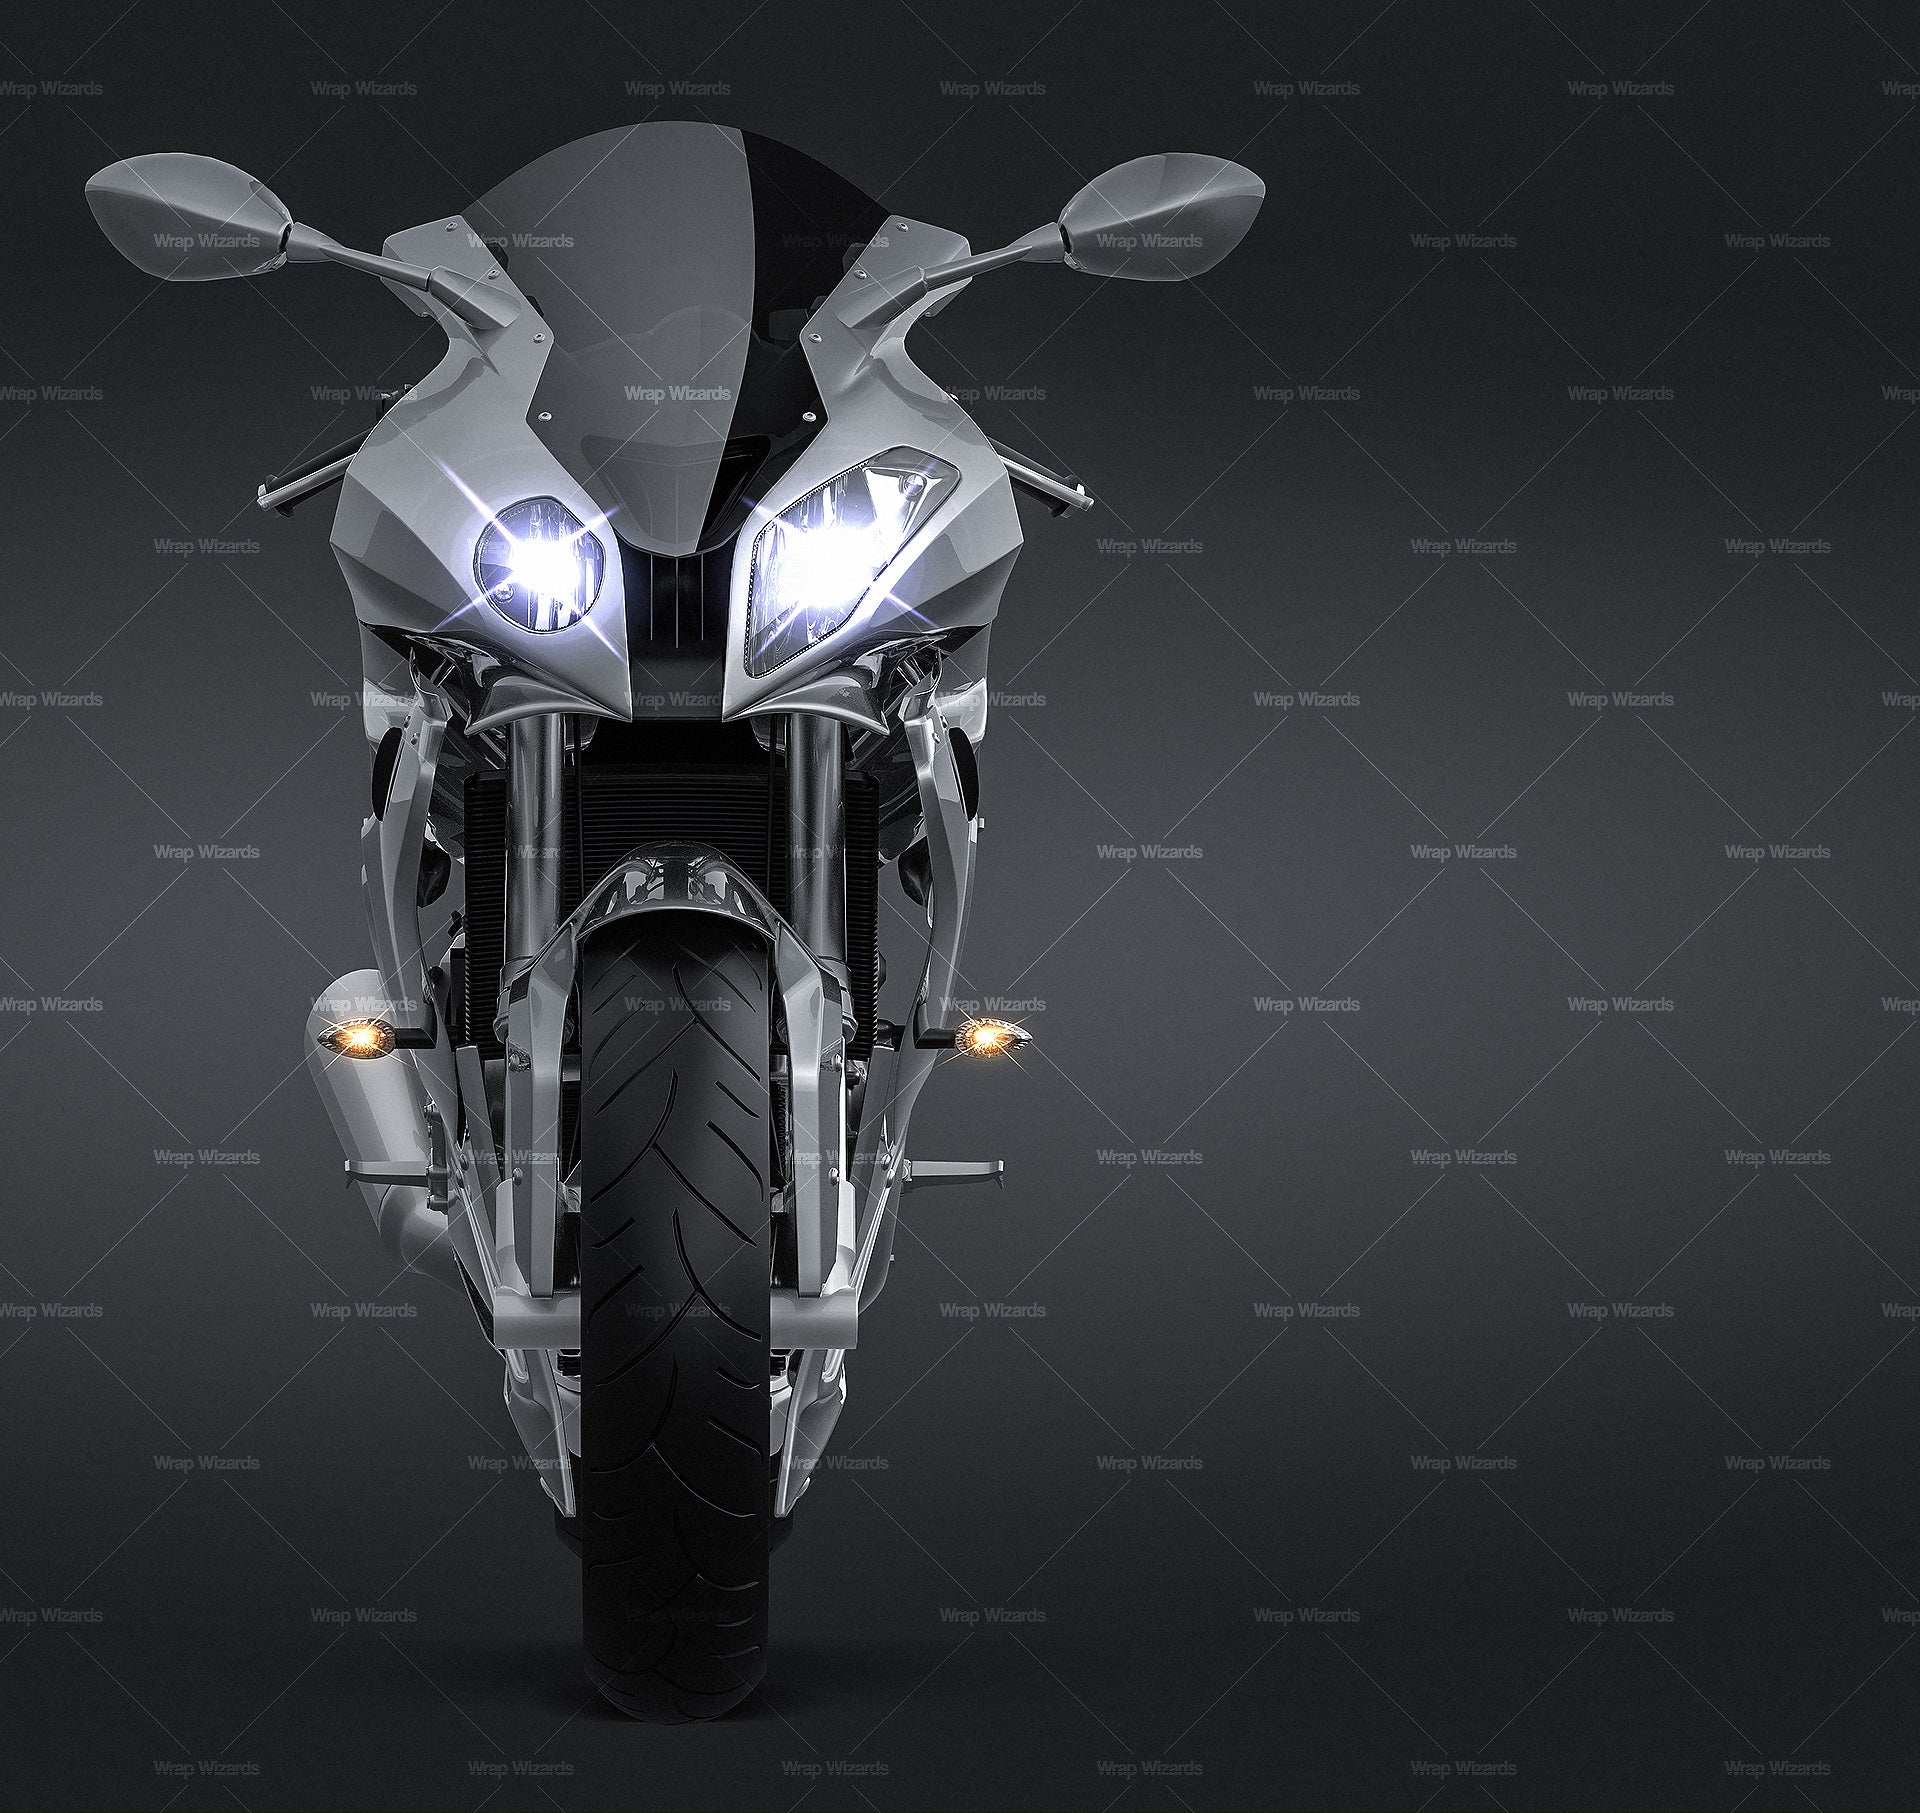 BMW S1000RR 2011 glossy finish - all sides Motorcycle Mockup Template.psd